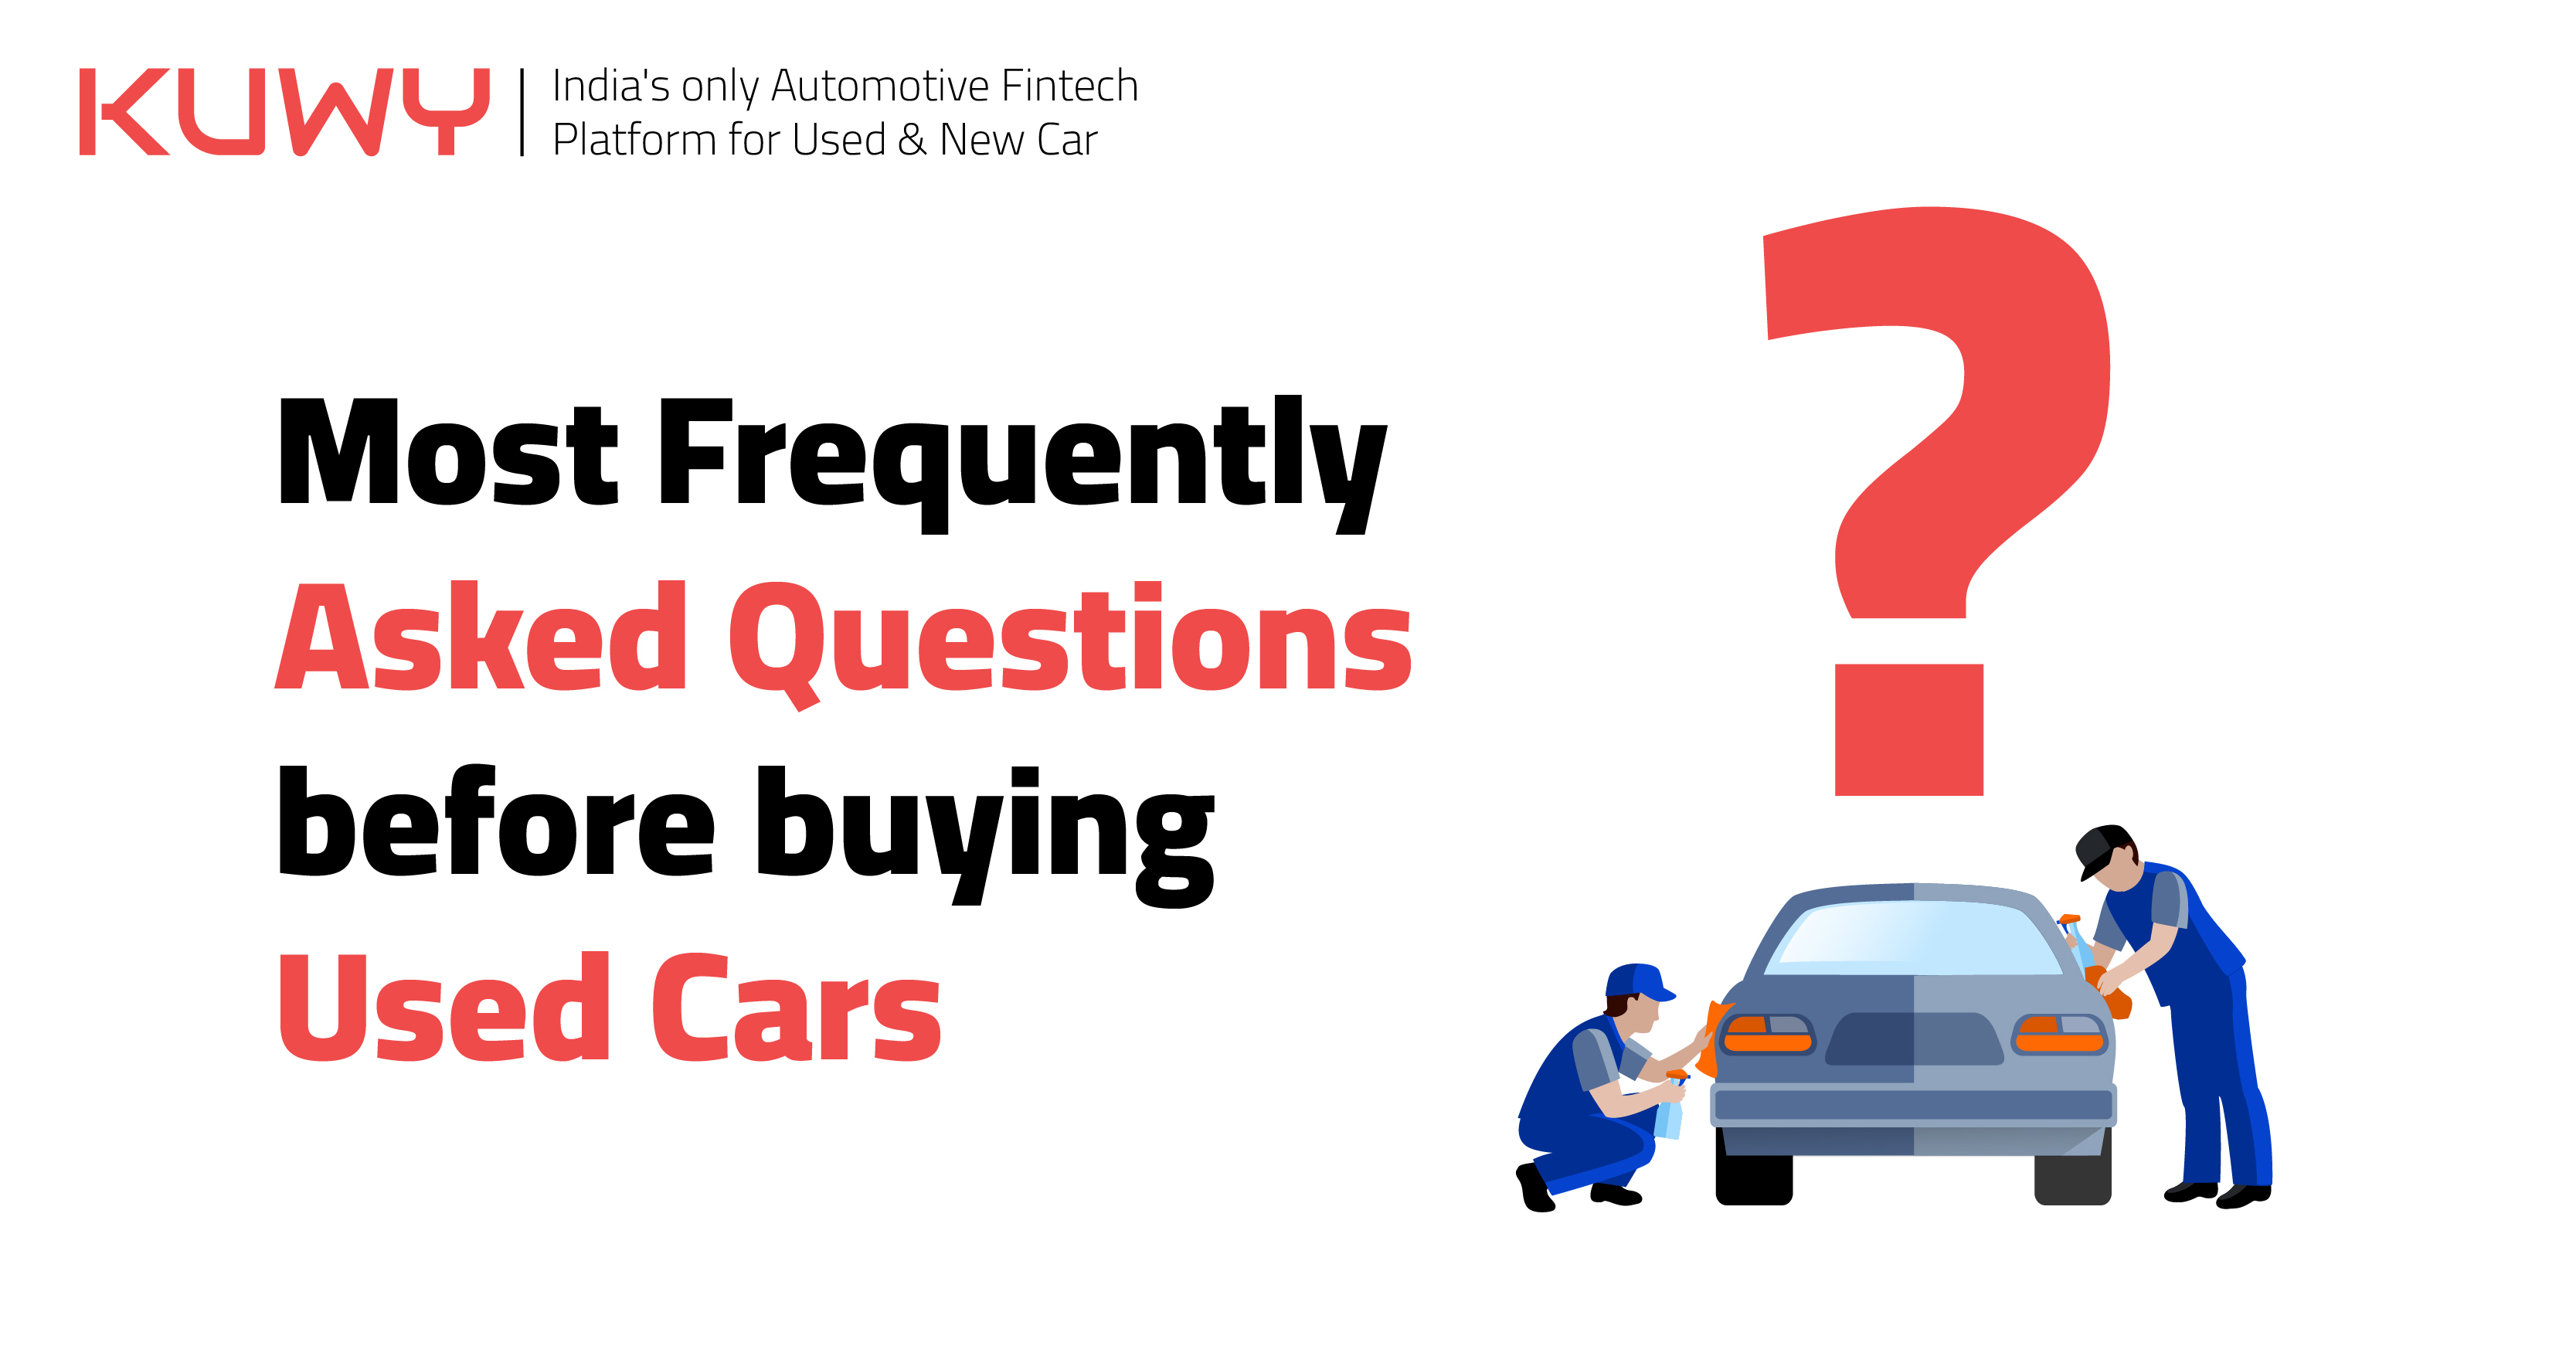 Most Frequently Asked Questions before buying Used Cars